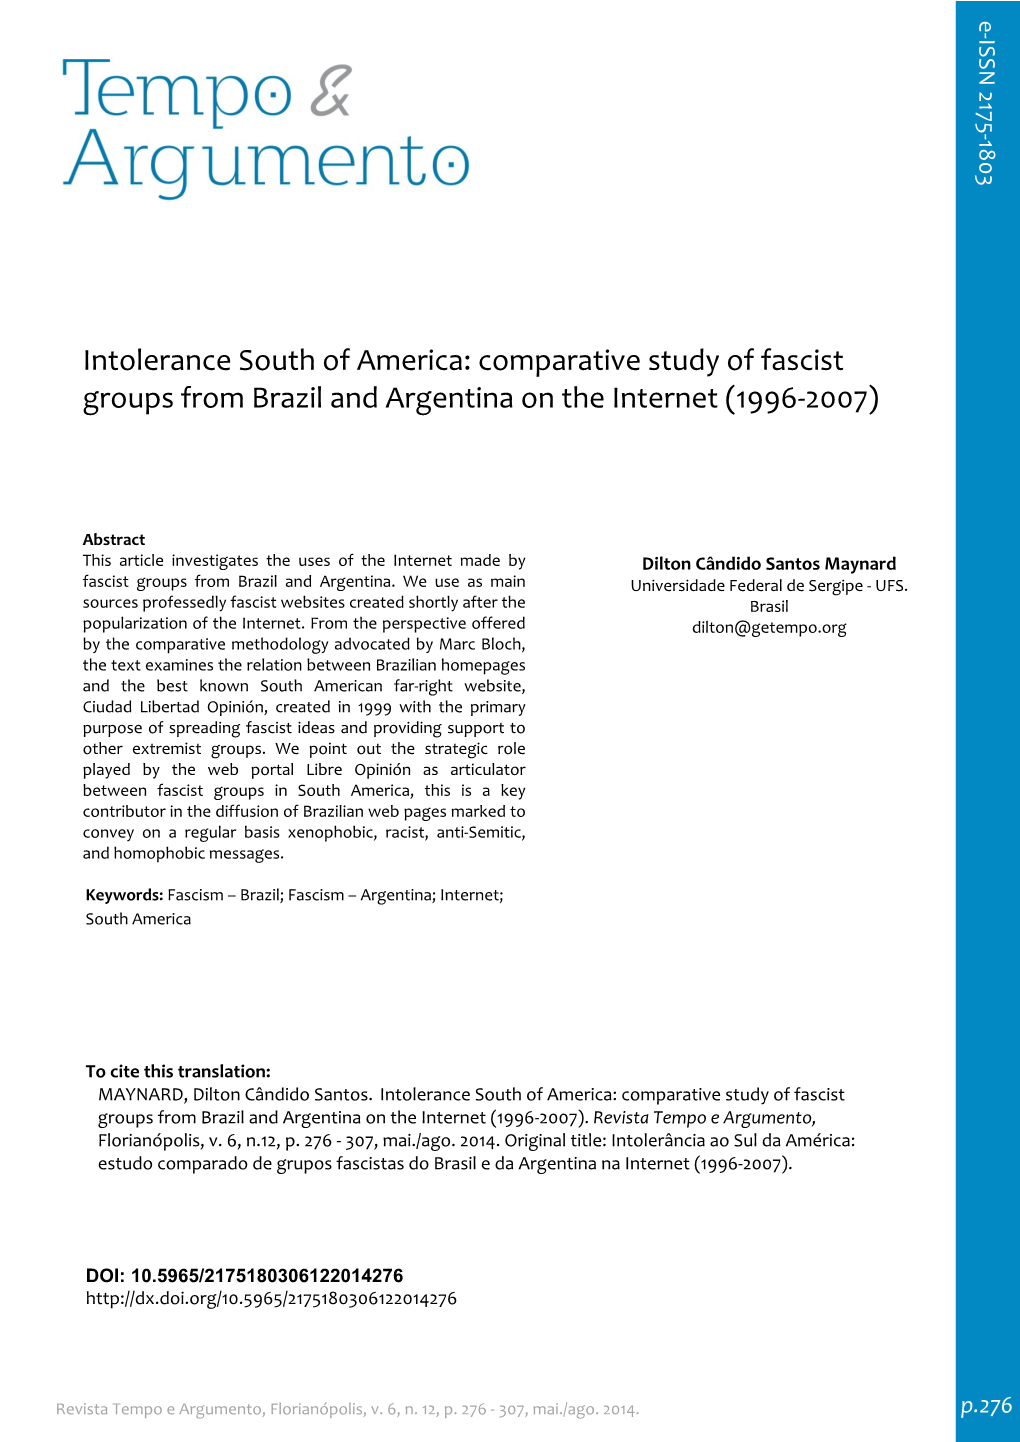 Intolerance South of America: Comparative Study of Fascist Groups from Brazil and Argentina on the Internet (1996-2007)